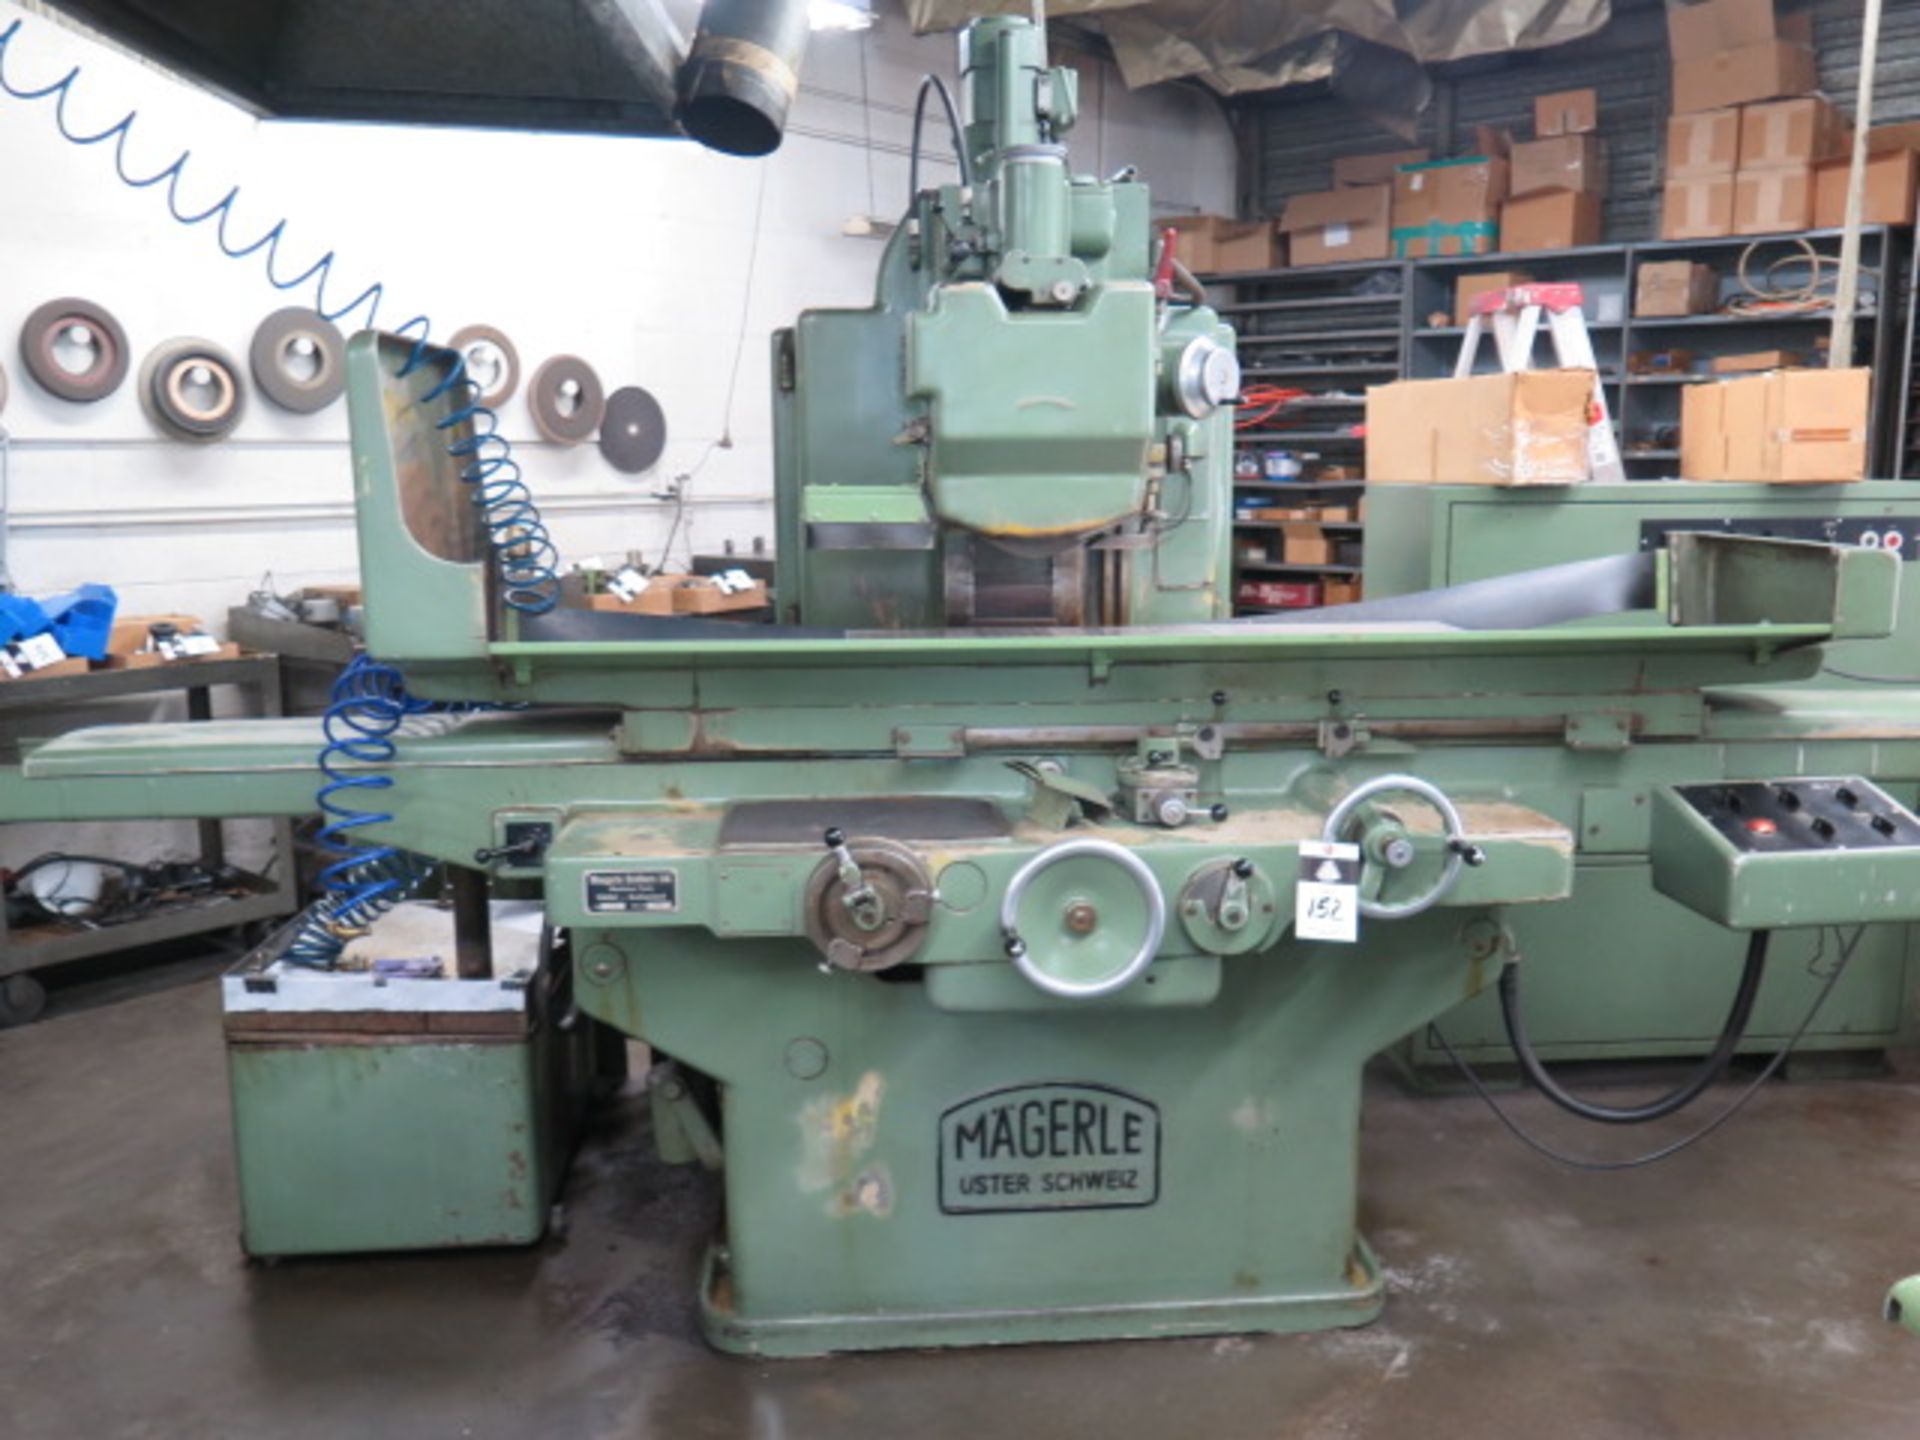 Magerle Type F-10 10" x 39 1/2" Automatic Hudraulic Surface Grinder s/n 585 w/ Magerle Controls,